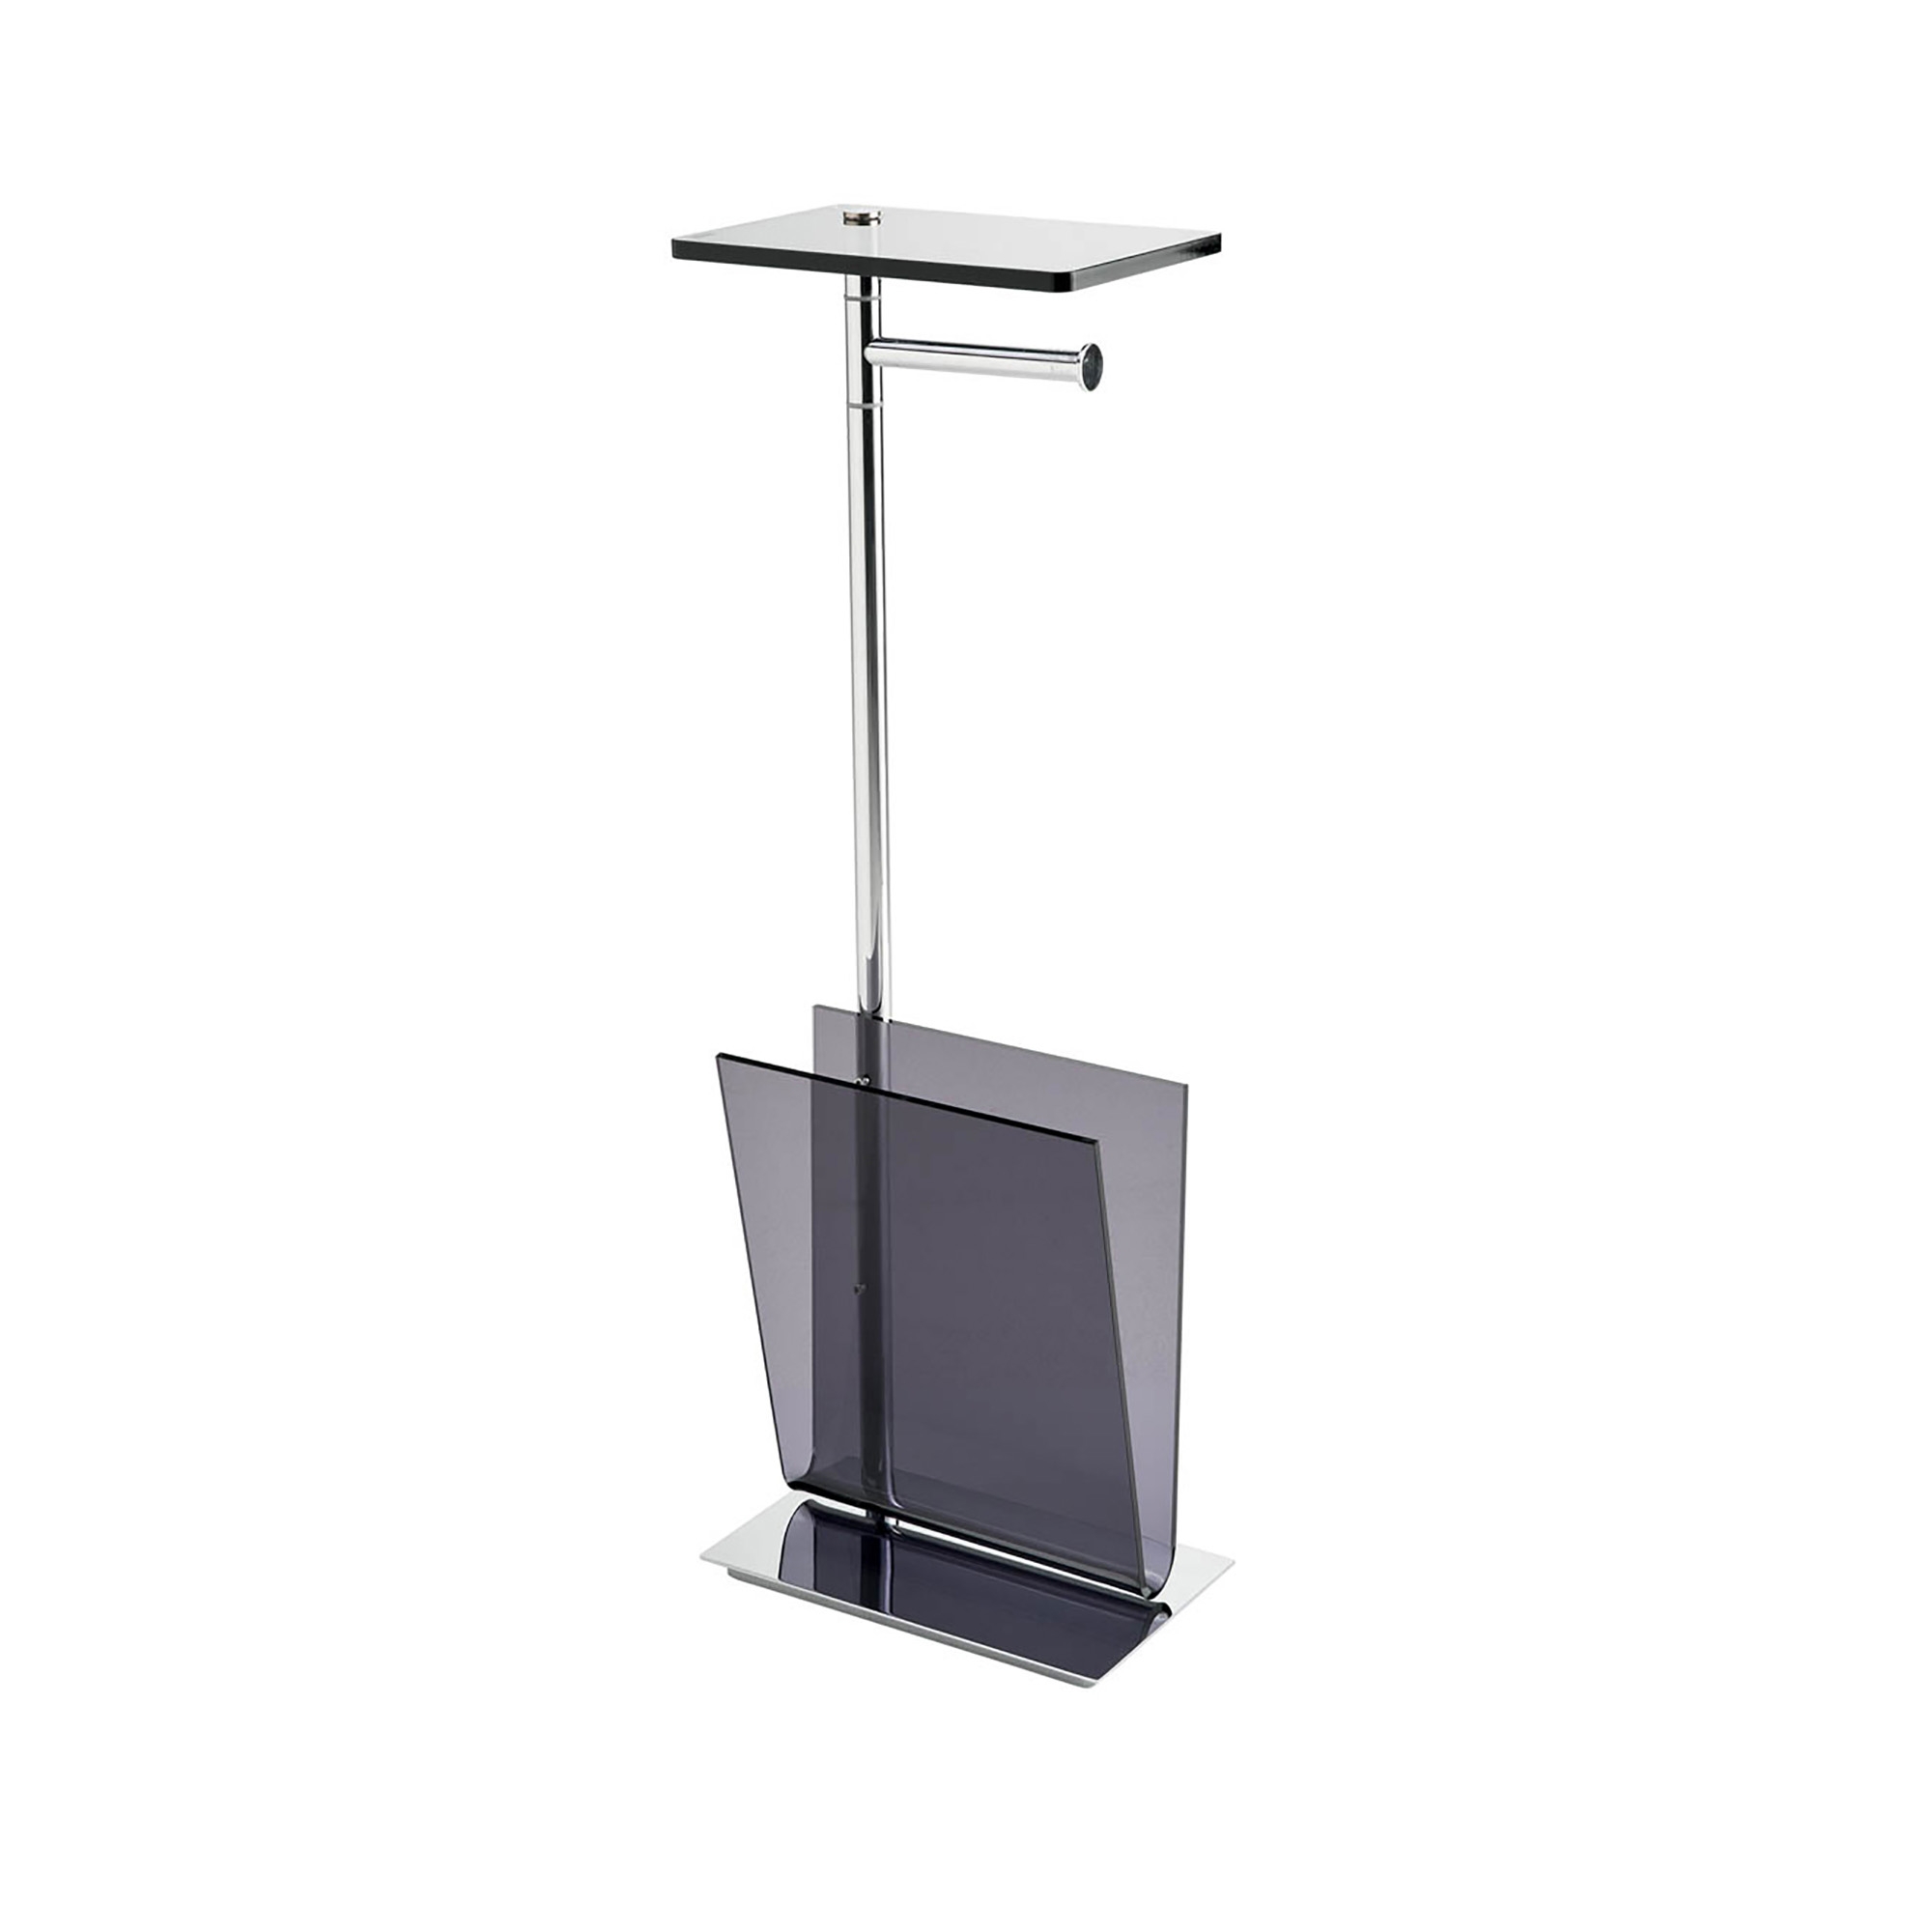 Avenue A57850 Floor Standing Bathroom Accessory Stand in Polished Chrome and Smoke